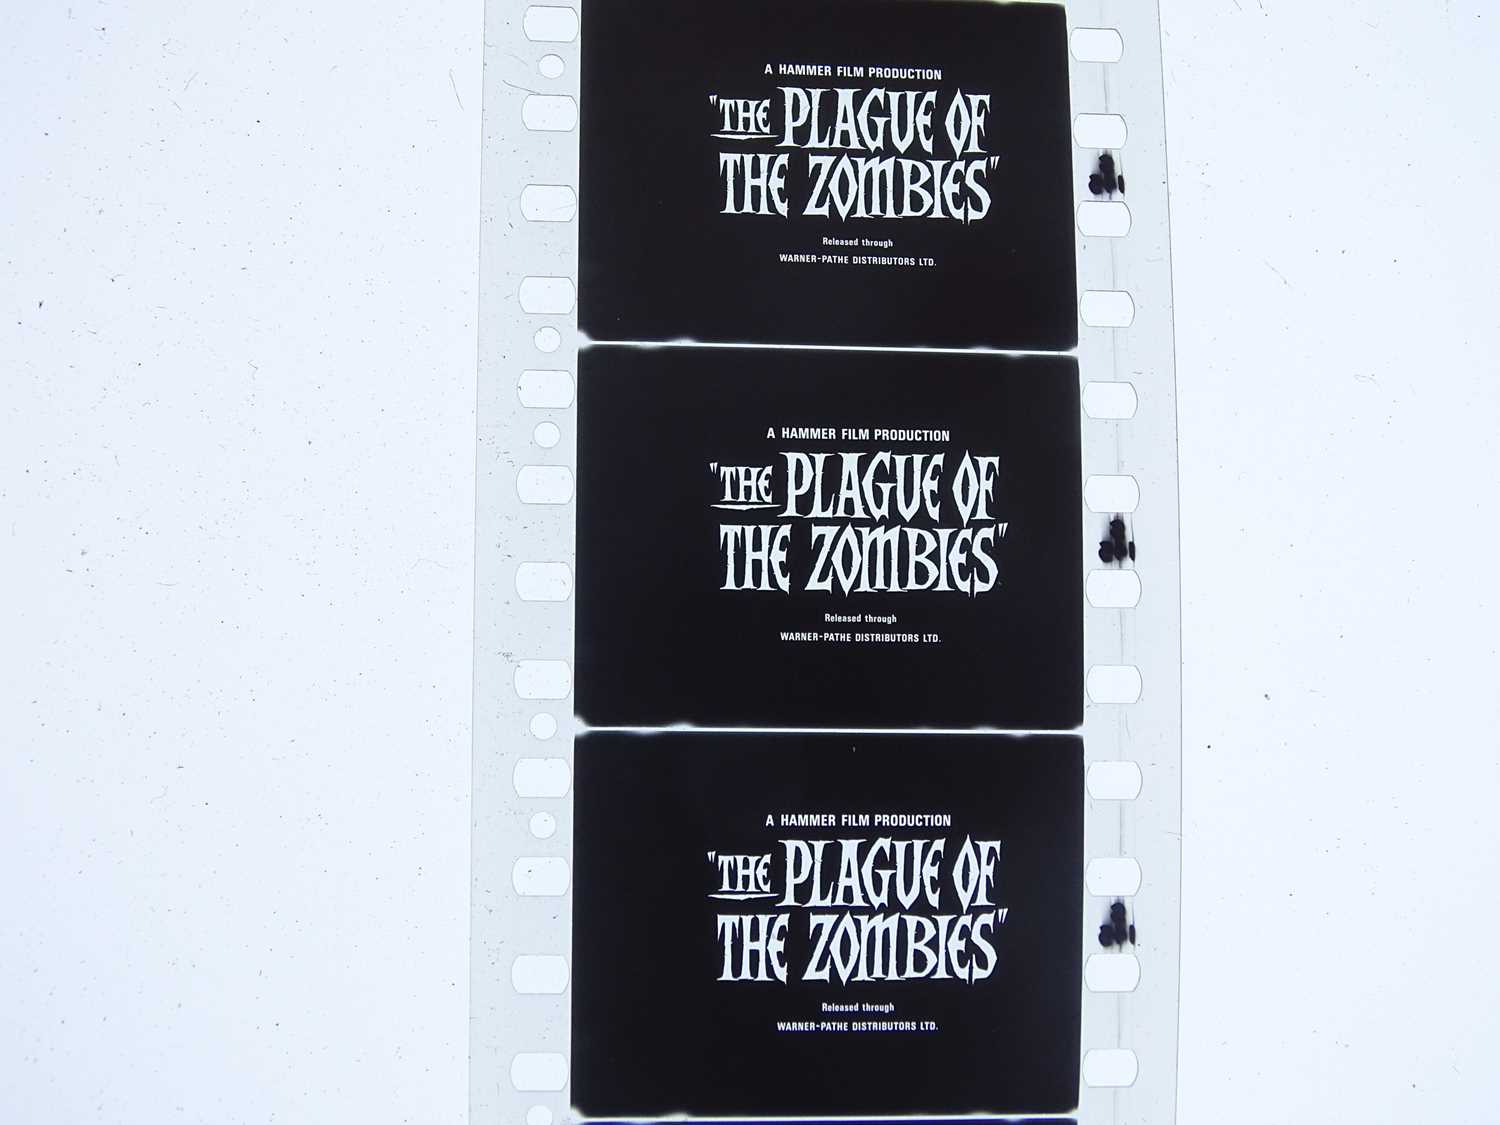 The Plague Of The Zombies (1966) - Image 4 of 5